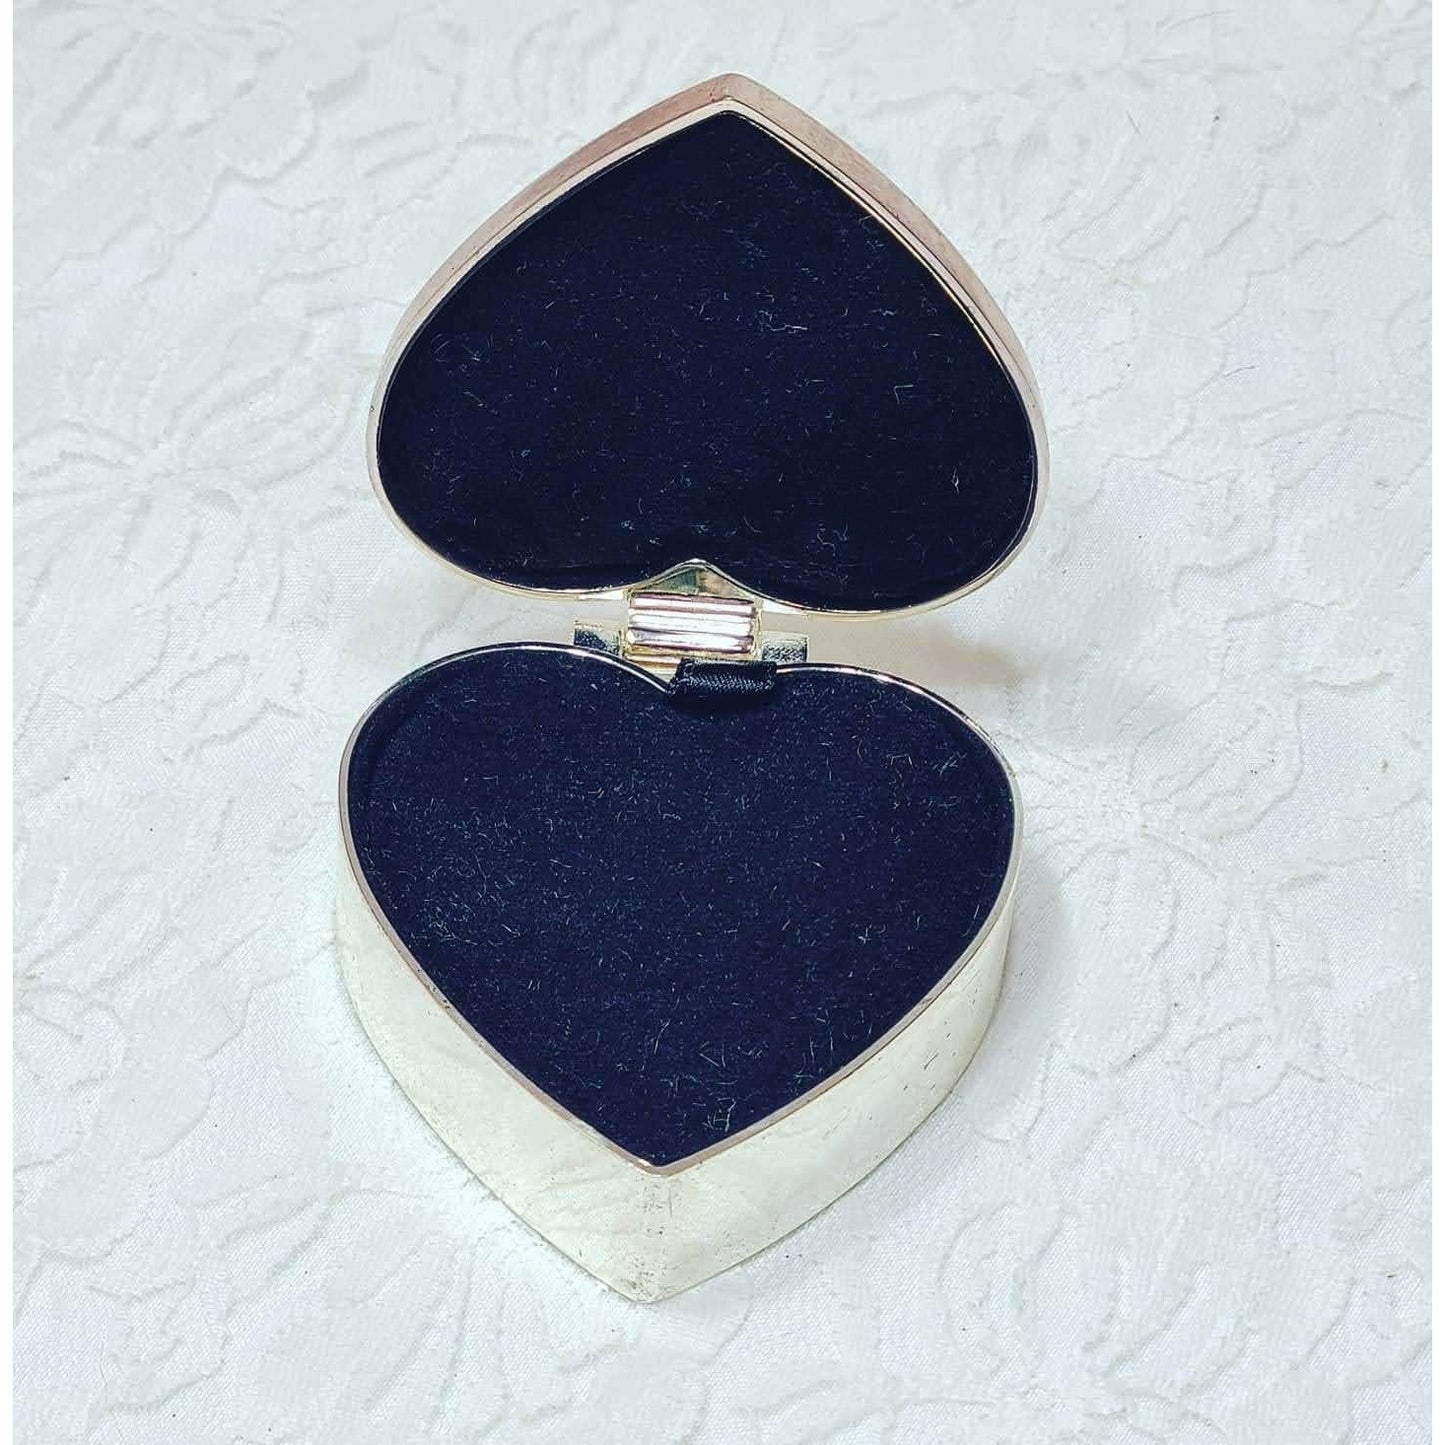 Heart Shaped Silver Trinket Box ~ Ring Box ~ Storage ~ Pill Box ~ Valentine's Day Gift ~Silver Plate Heart ~ Black Velvet Lined Jewelry Box